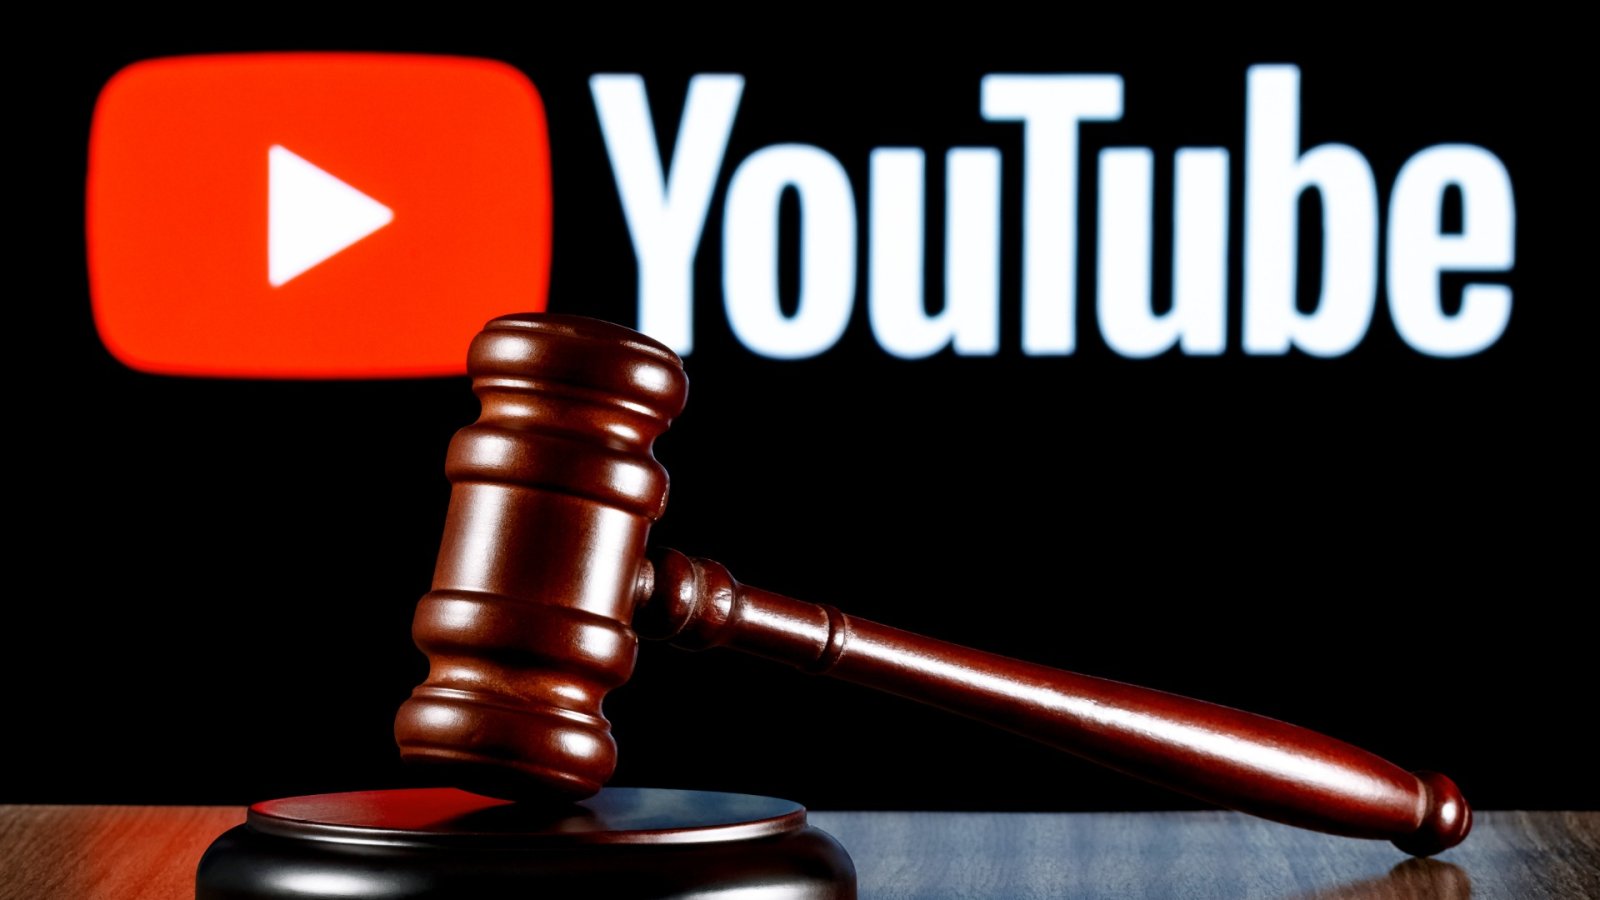 $22 million lawsuit against the mother of a YouTuber alleging abuse